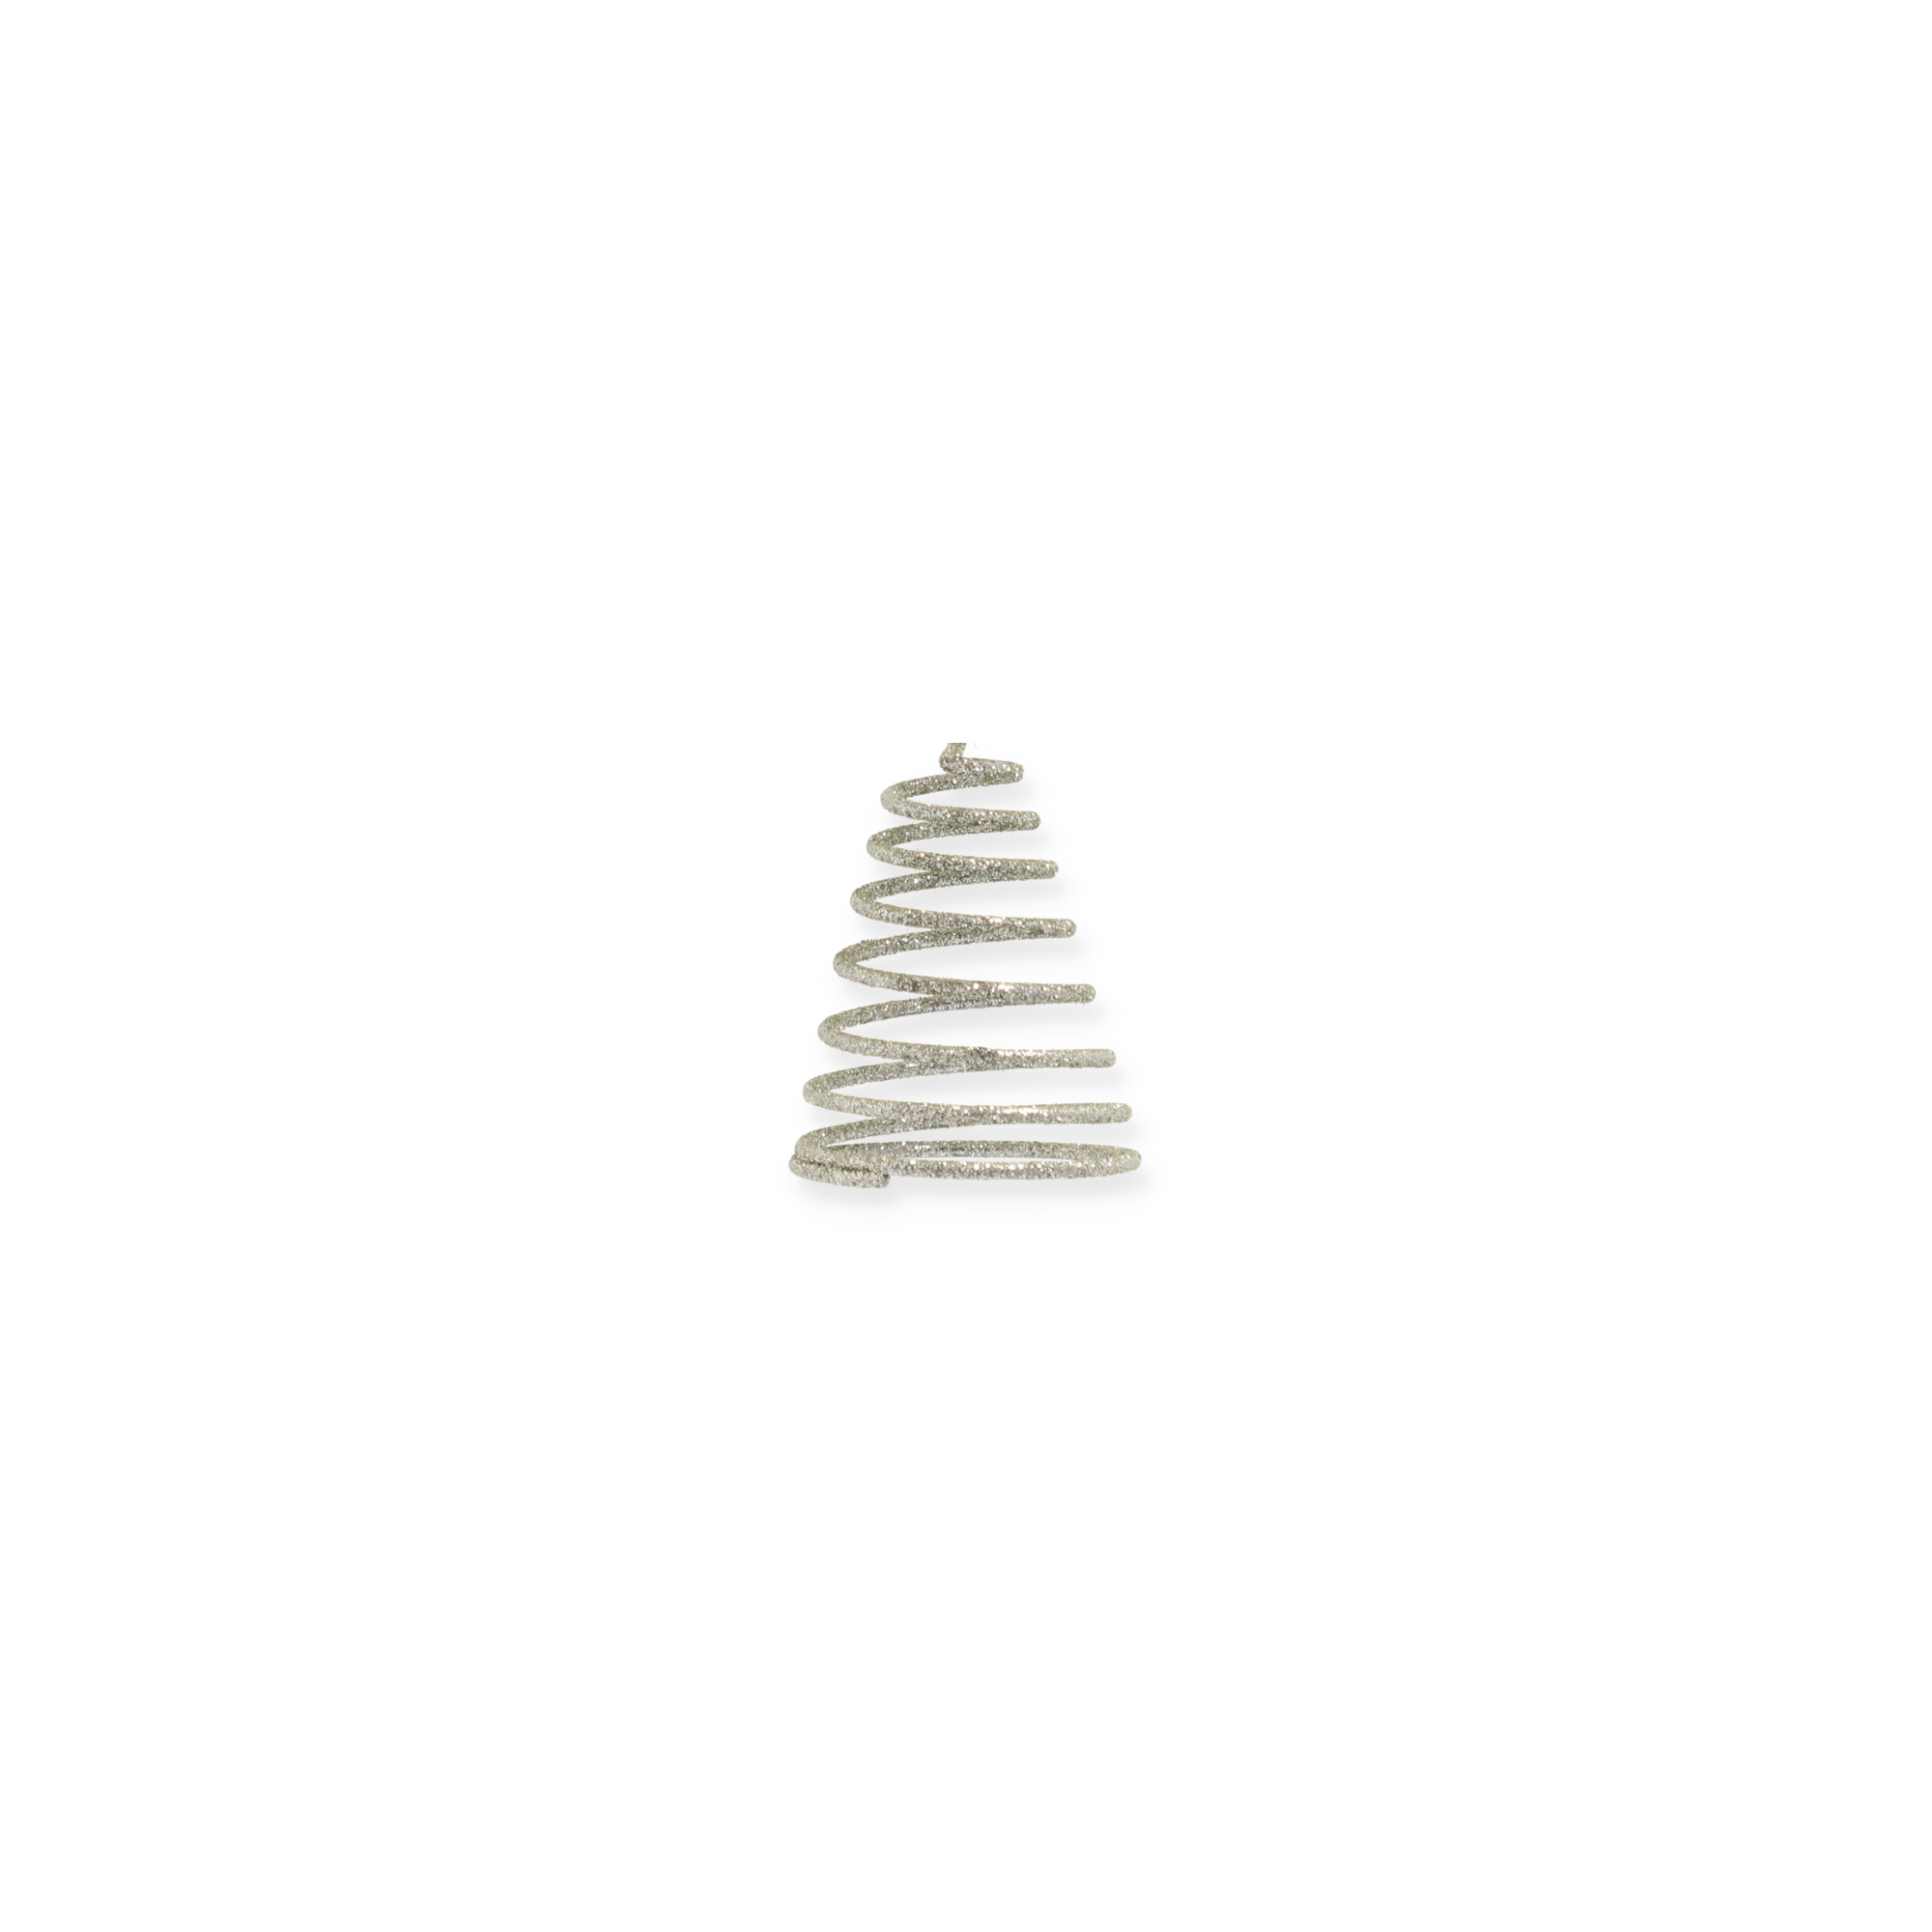 Christbaumspitze Stern silbern/gold + product picture